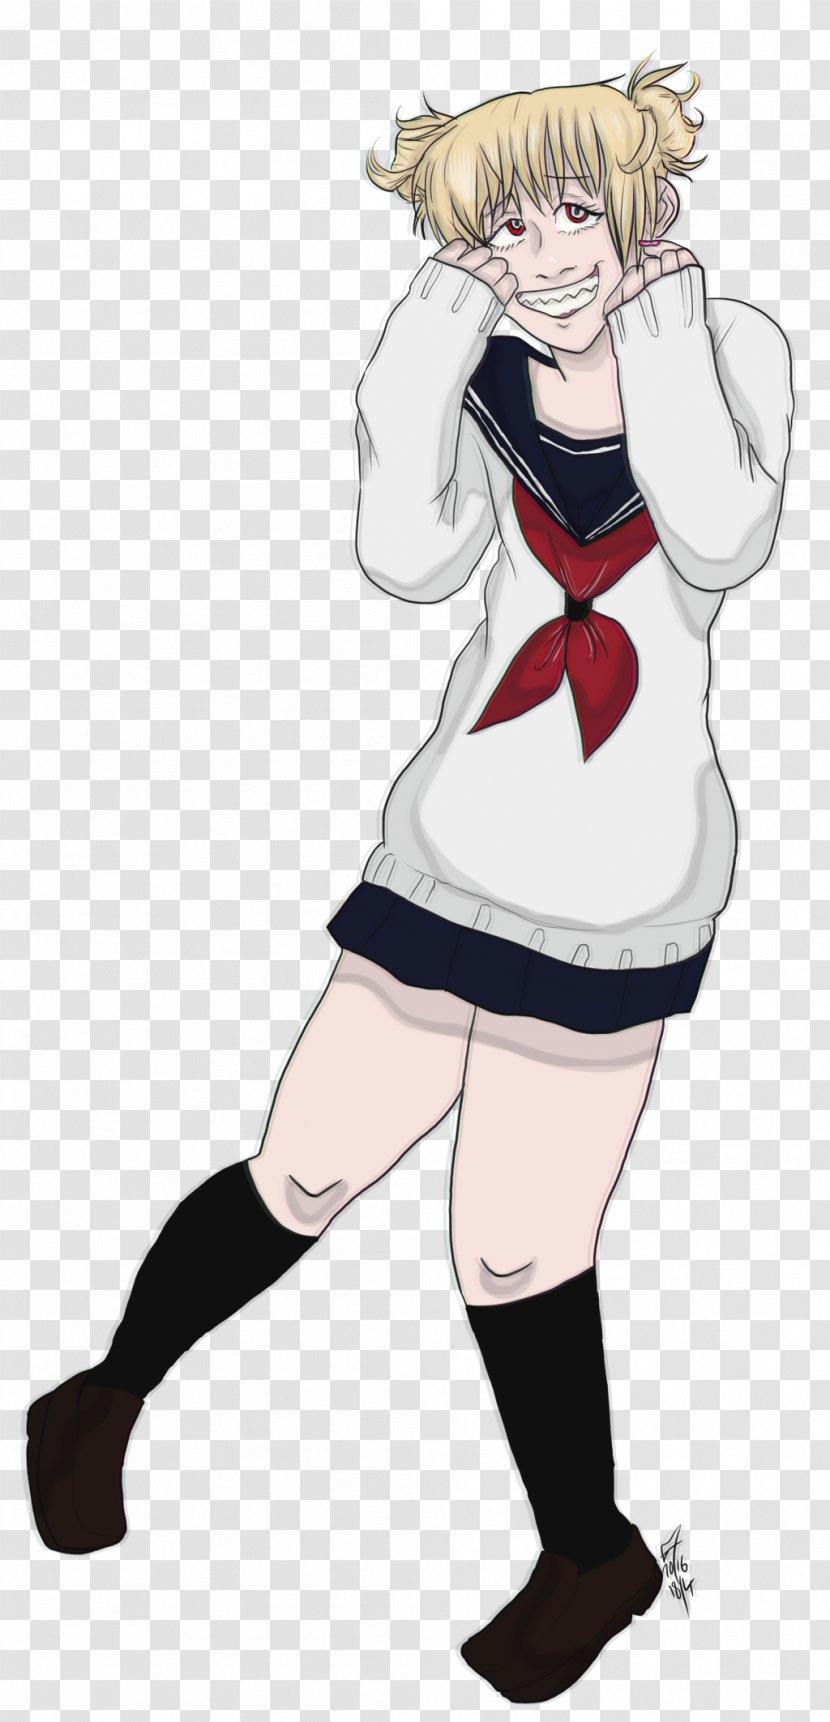 Toga Wikipedia Encyclopedia My Hero Academia: One's Justice - Heart - Himiko Transparent PNG